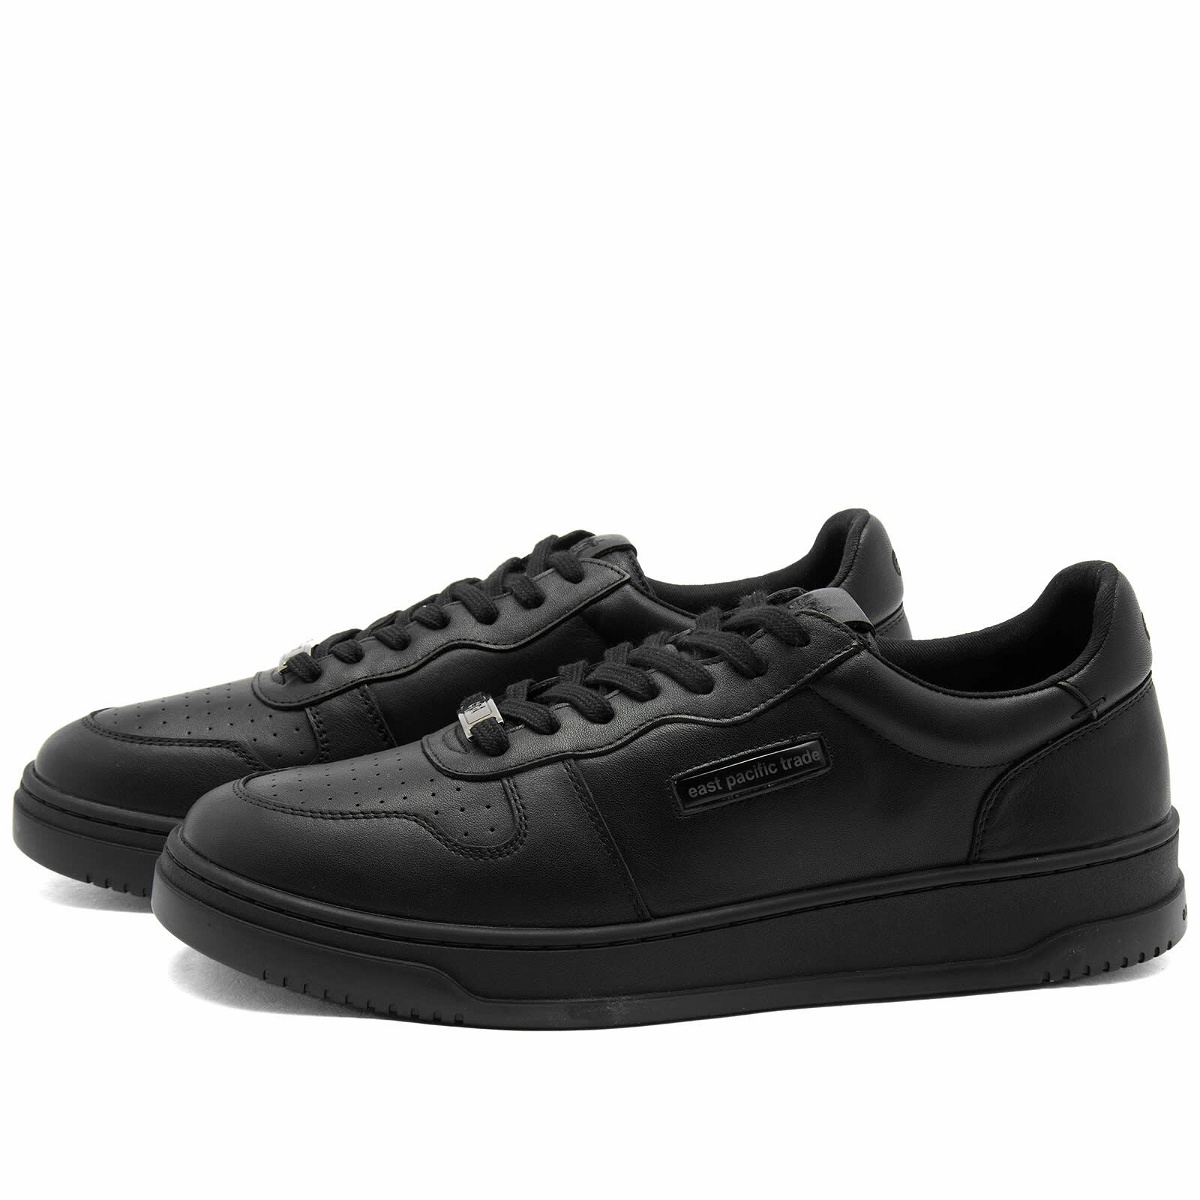 Photo: East Pacific Trade Men's Dive Court Sneakers in Black